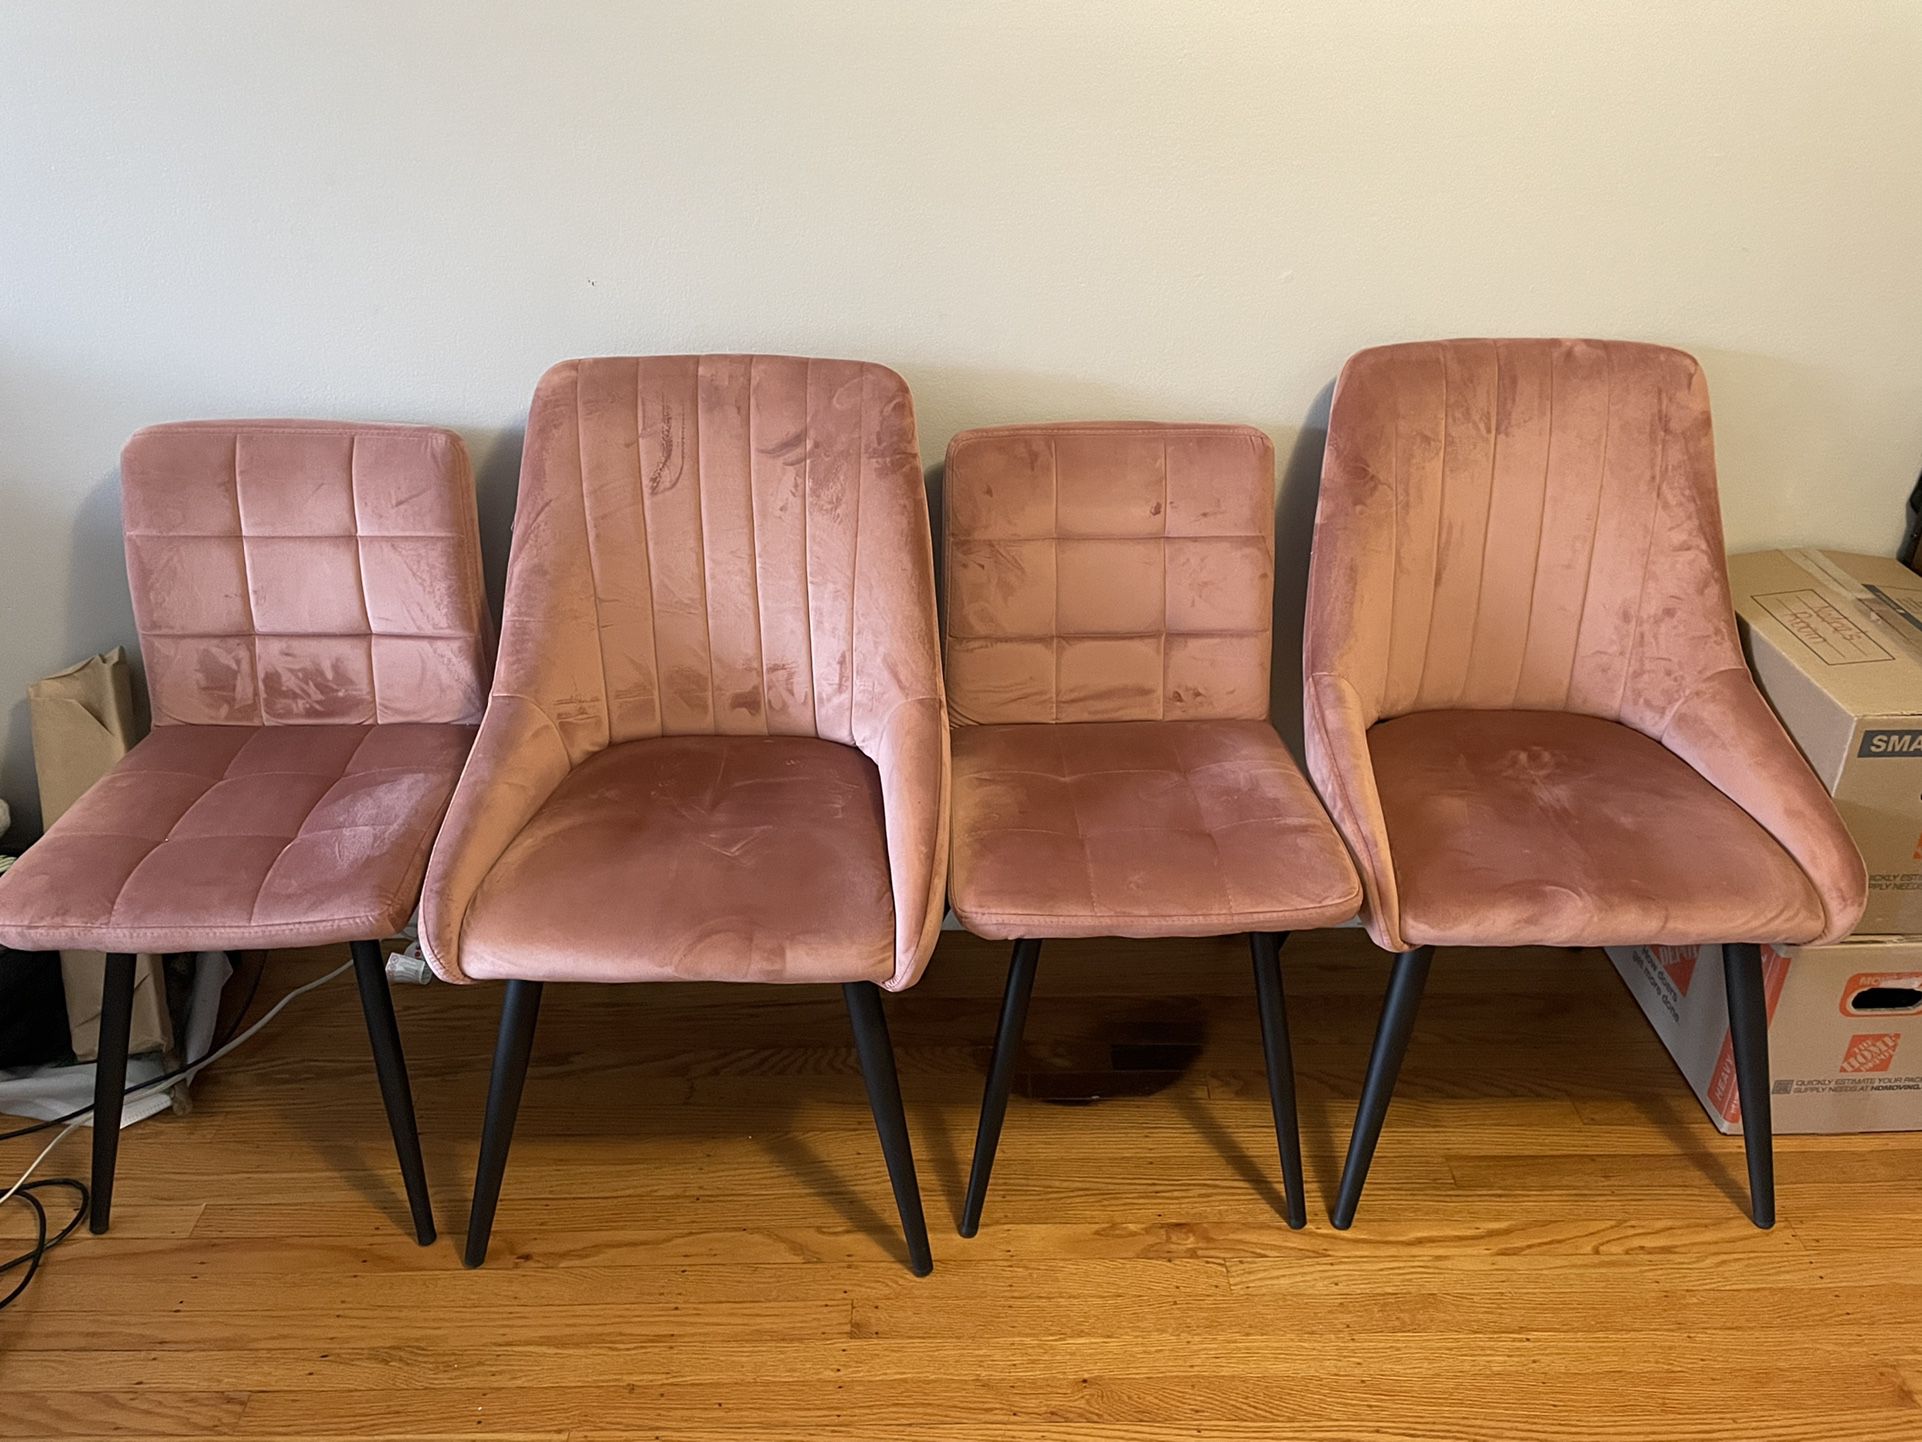 Suede Chairs Set Of 4 